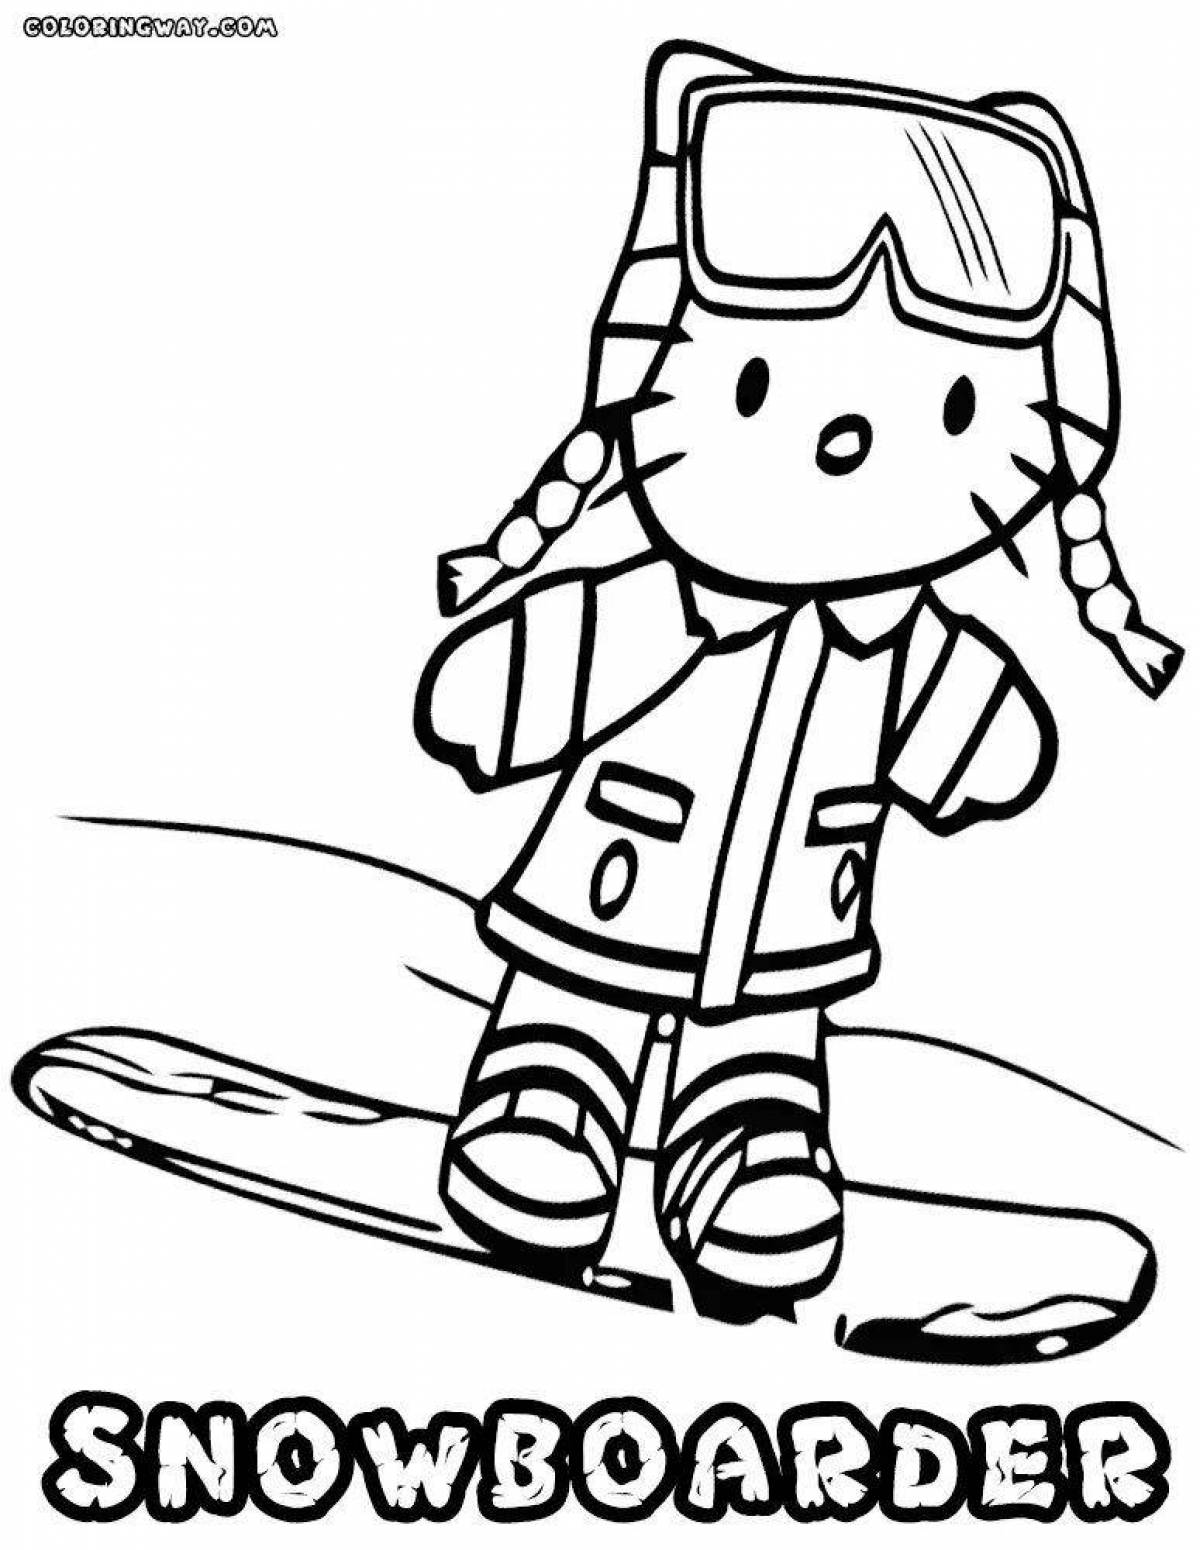 Coloring book exciting snowboarder